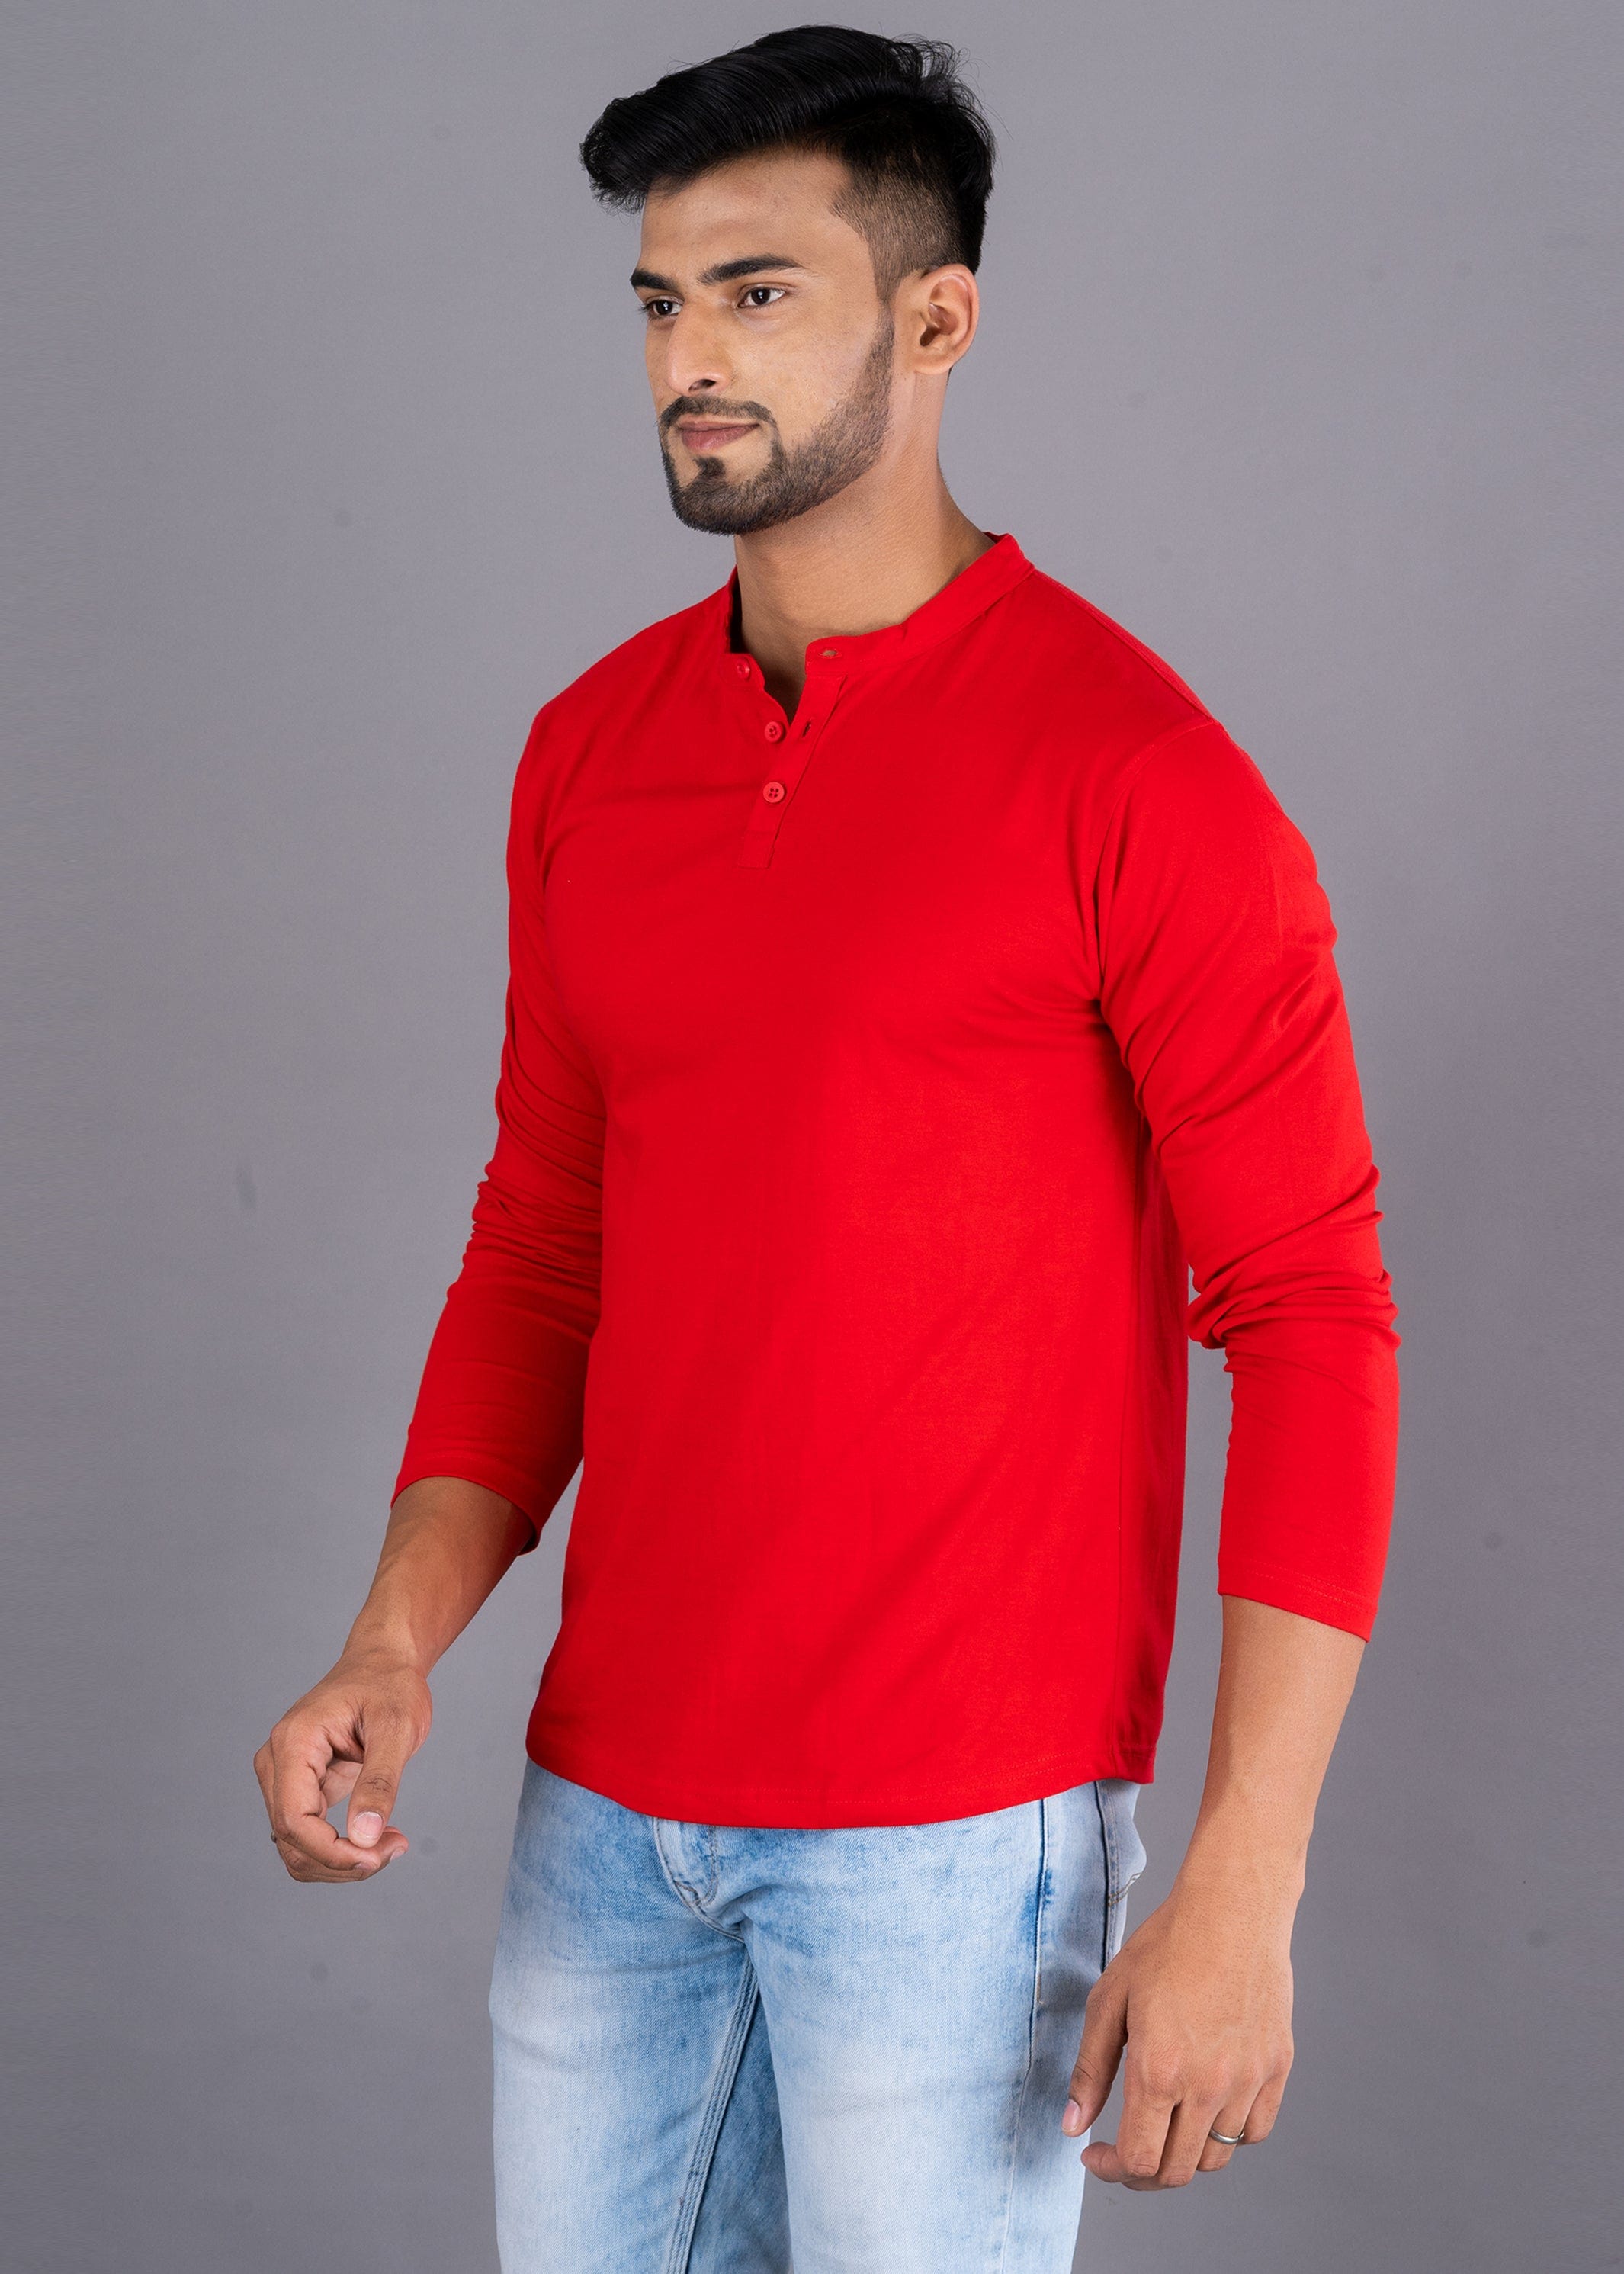 Solid Full Sleeve Premium Cotton Henley T-shirt For Men - Red